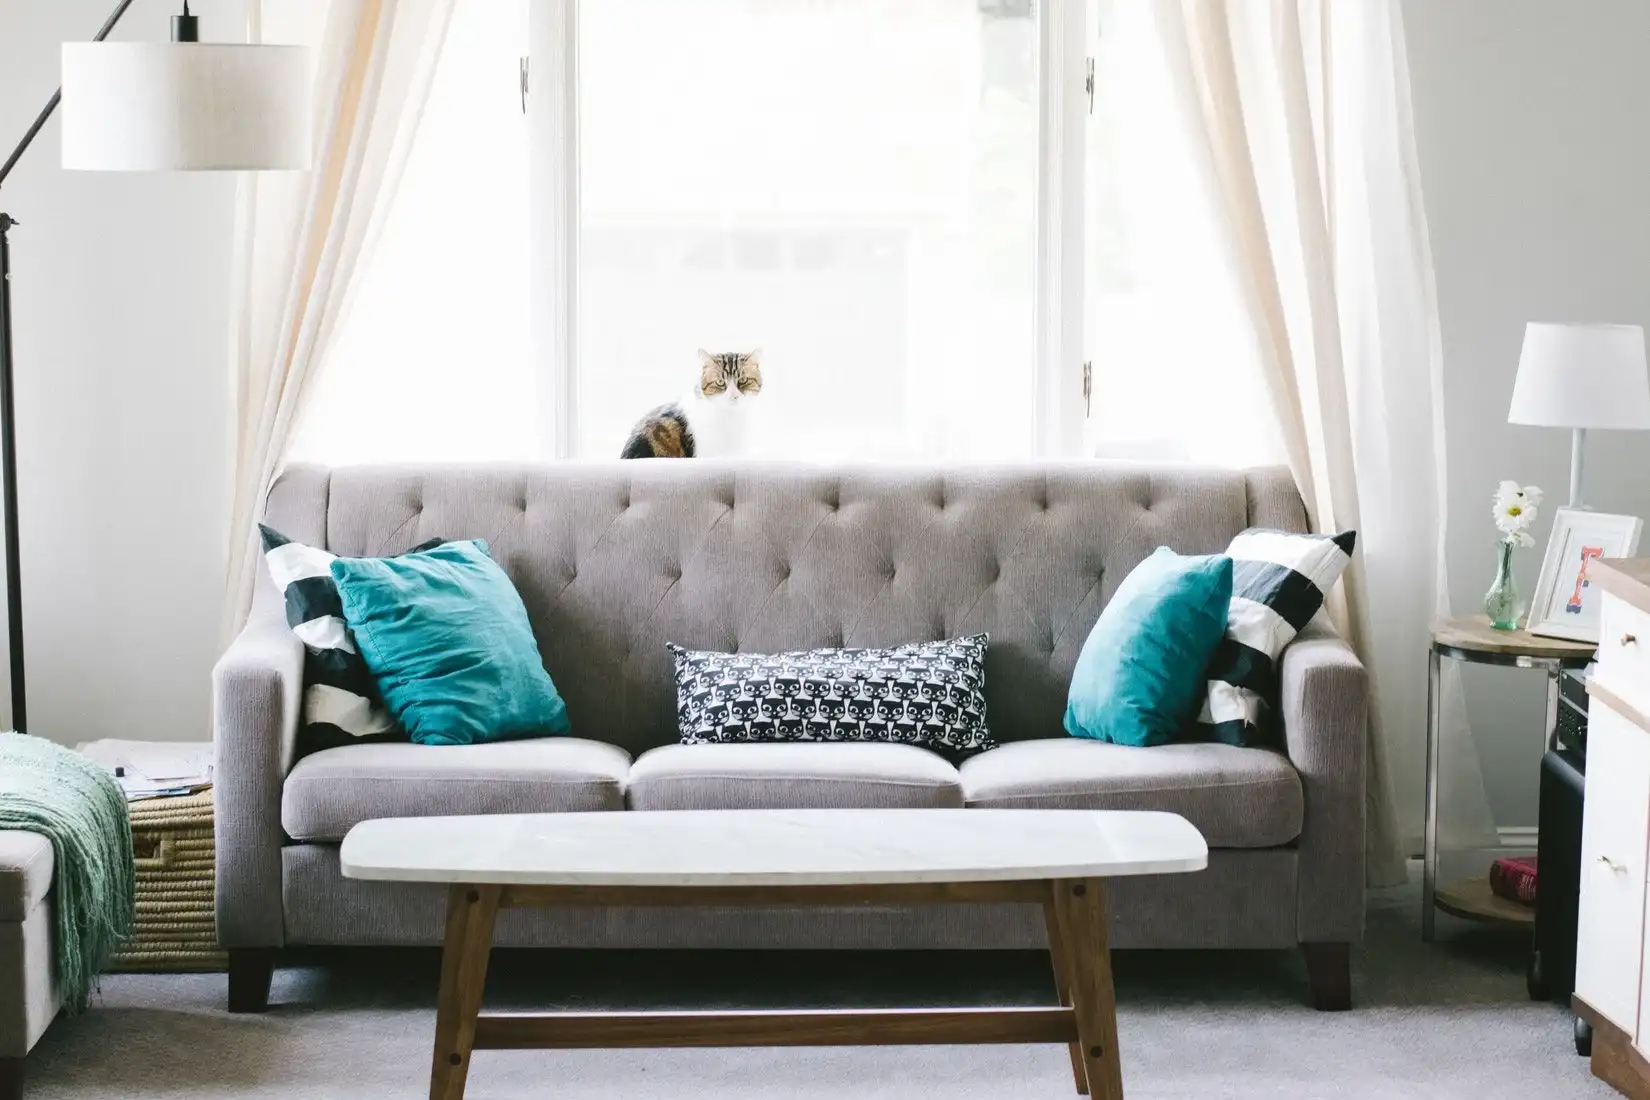 Here’s Why You Need to Sell Extended Warranties on Furniture